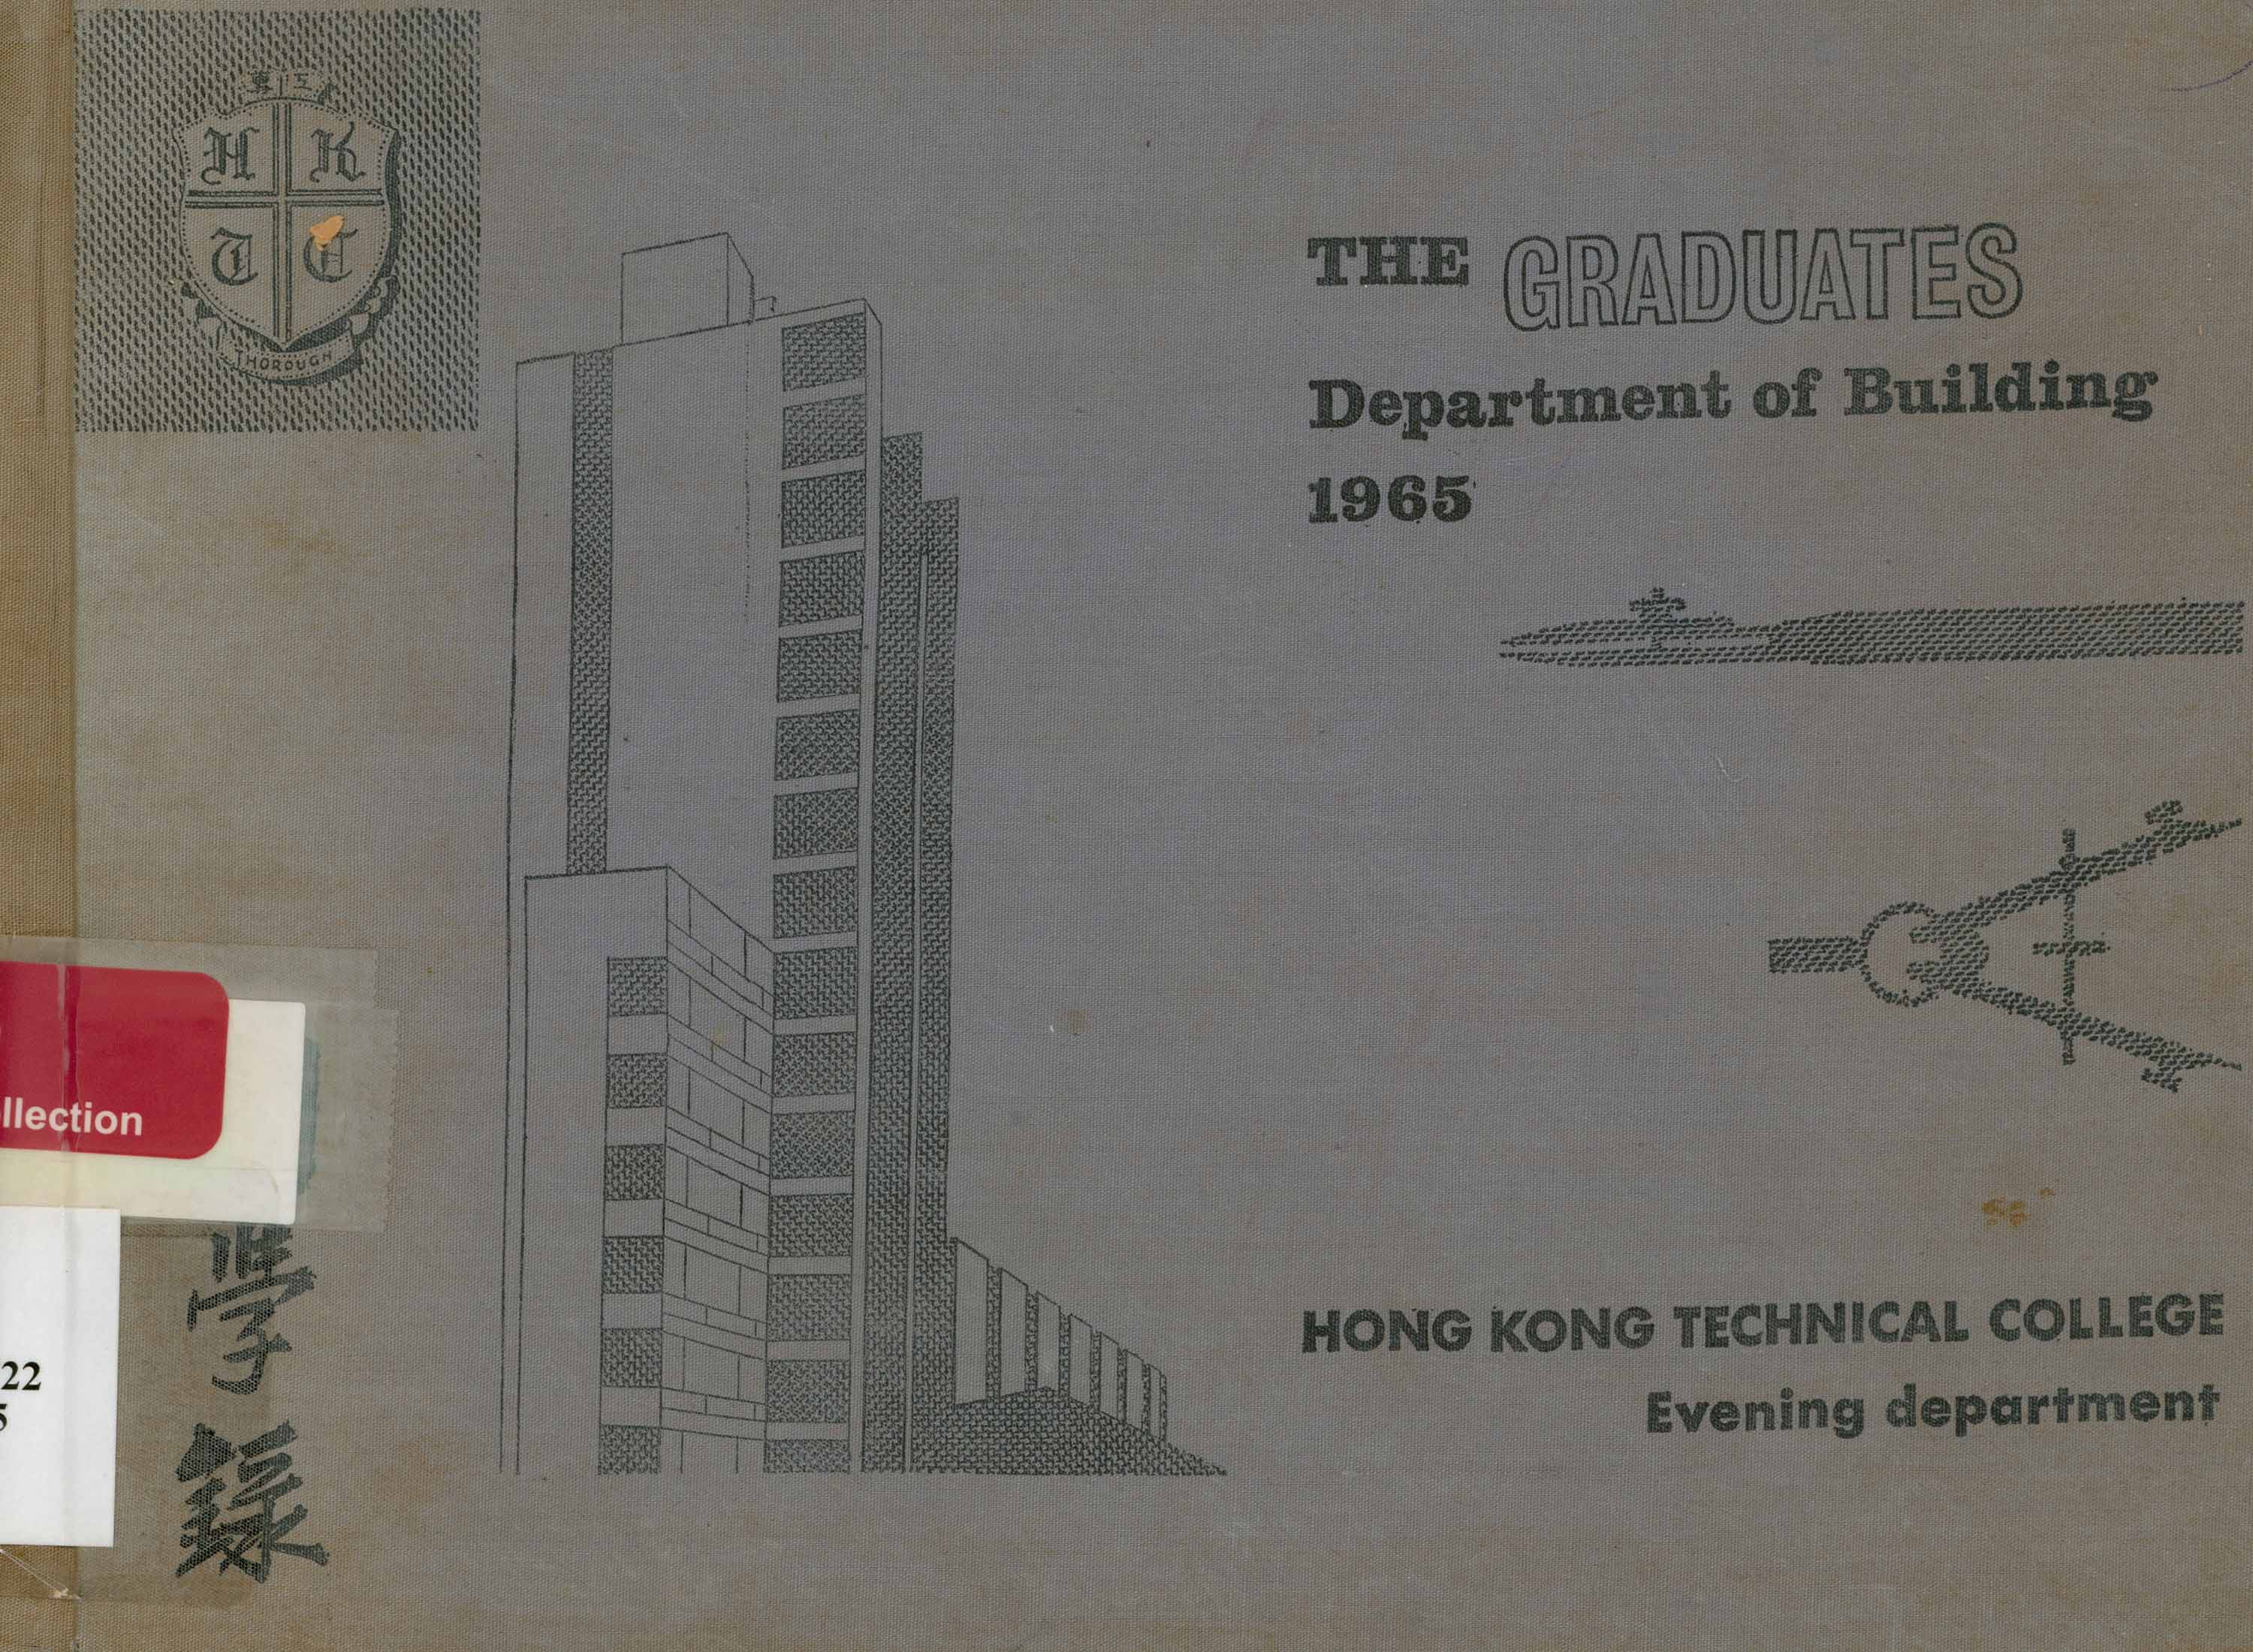 Hong Kong Technical College. Evening department. Department of Building. The graduates: 1965